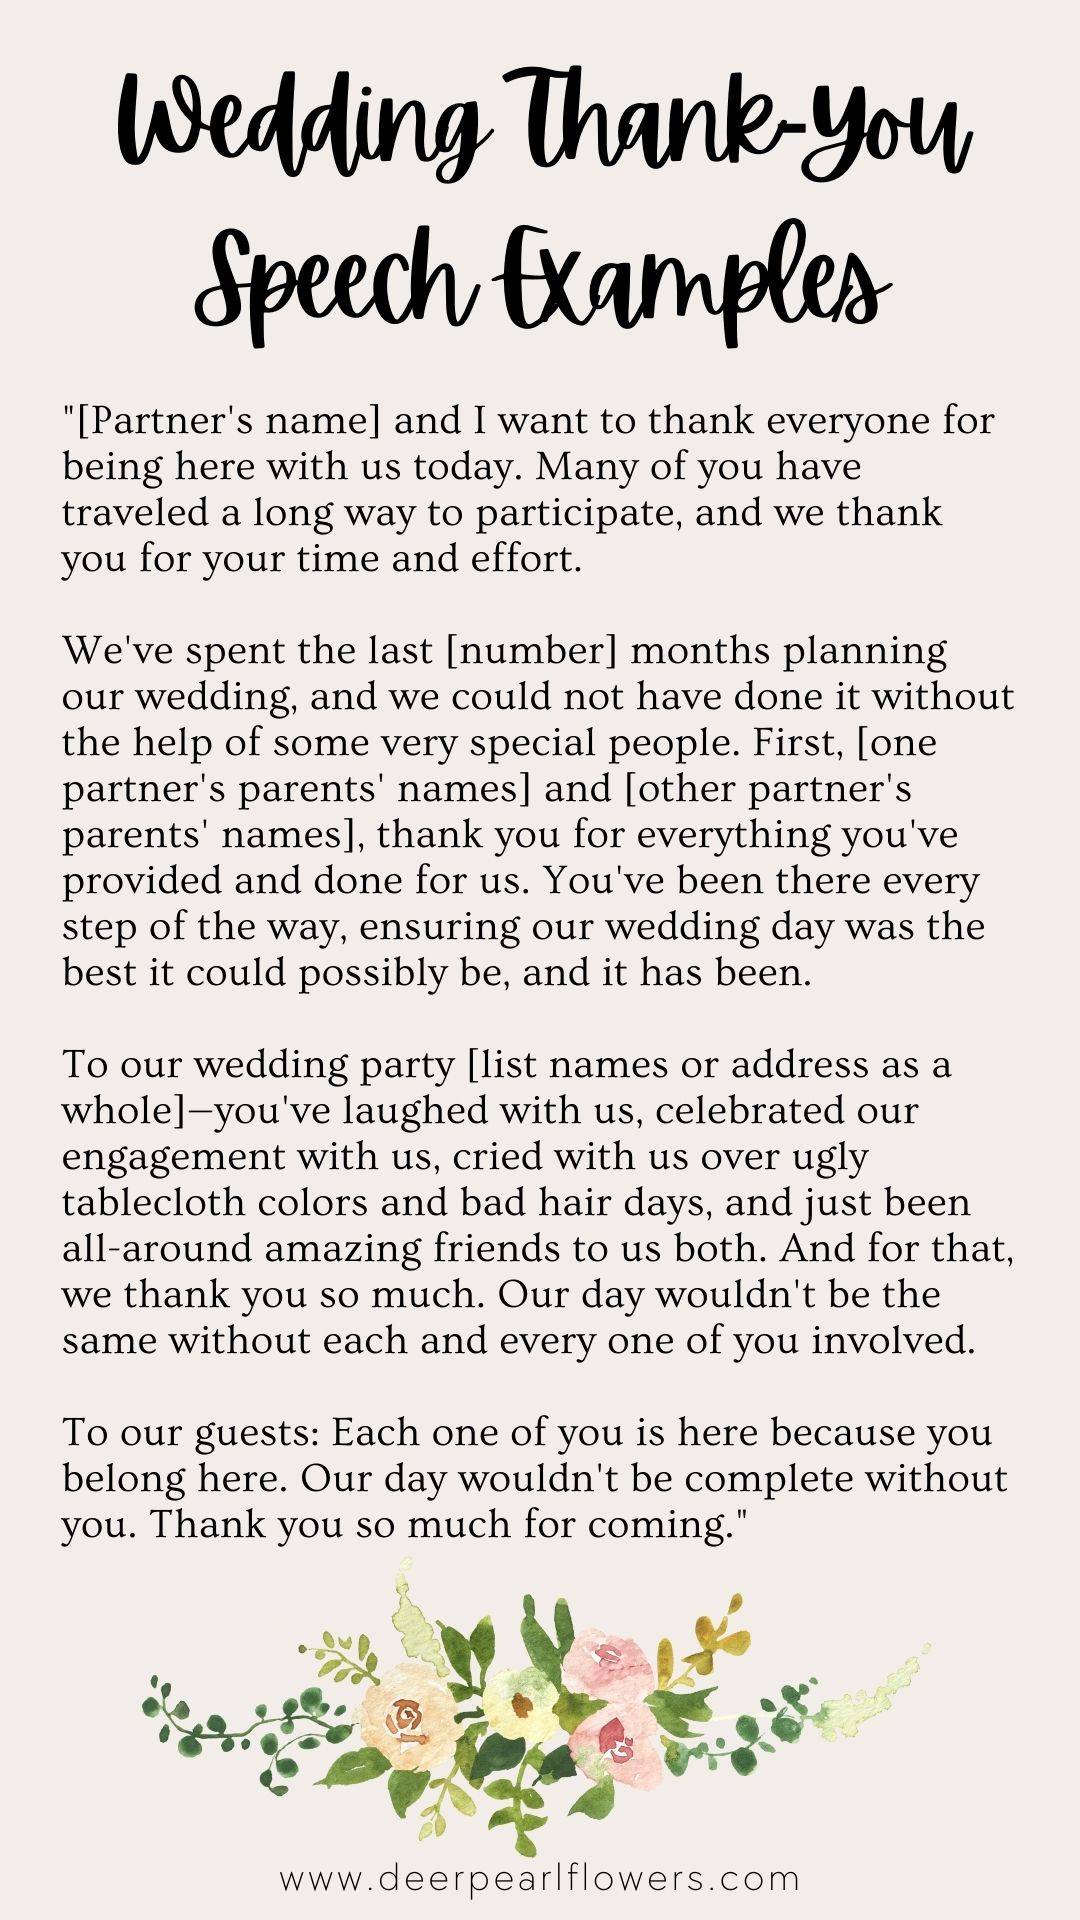 what to say in wedding thank you speech